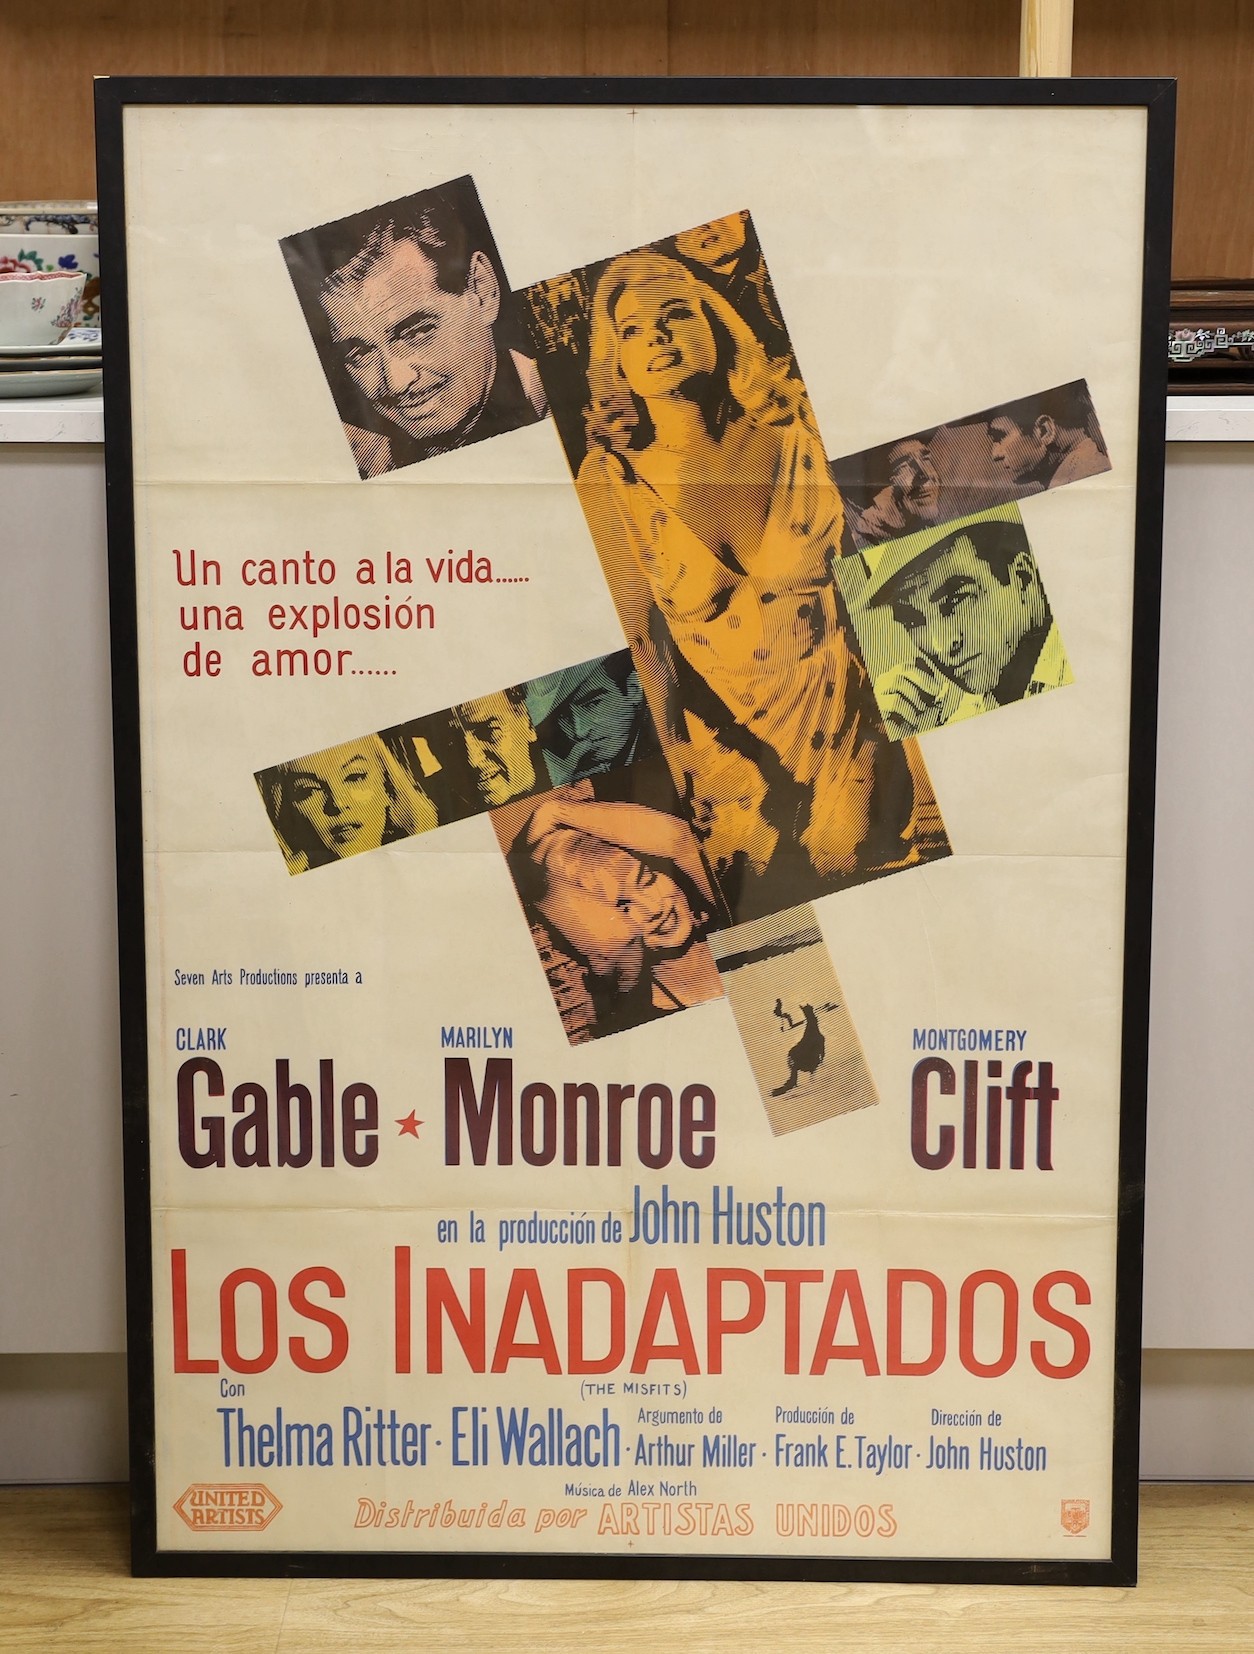 Clark Gable and Marilyn Monroe - Argentinian one-sheet film poster, The Misfits 1961